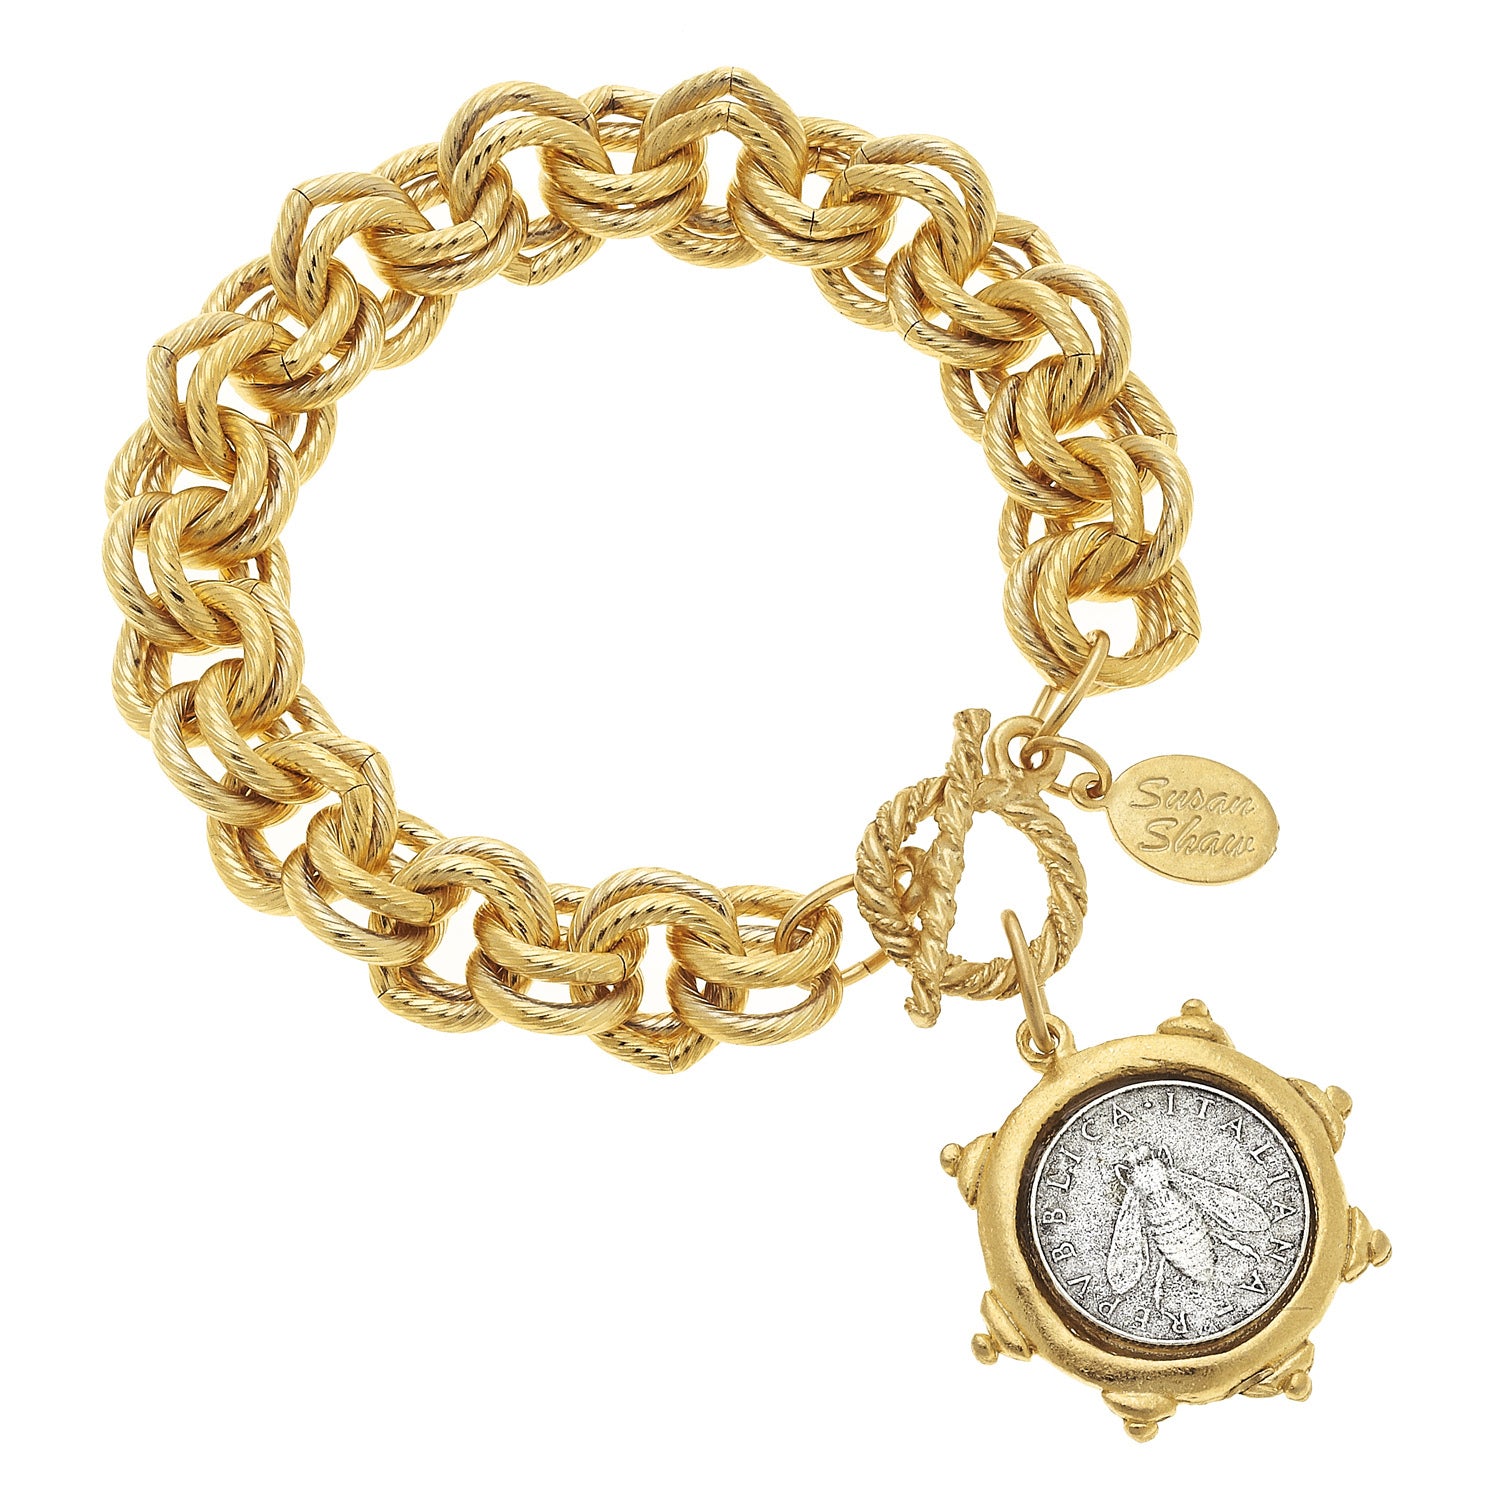 Susan Shaw Gold Plated Bee Coin Bracelet with Double Textured Chain, 8"